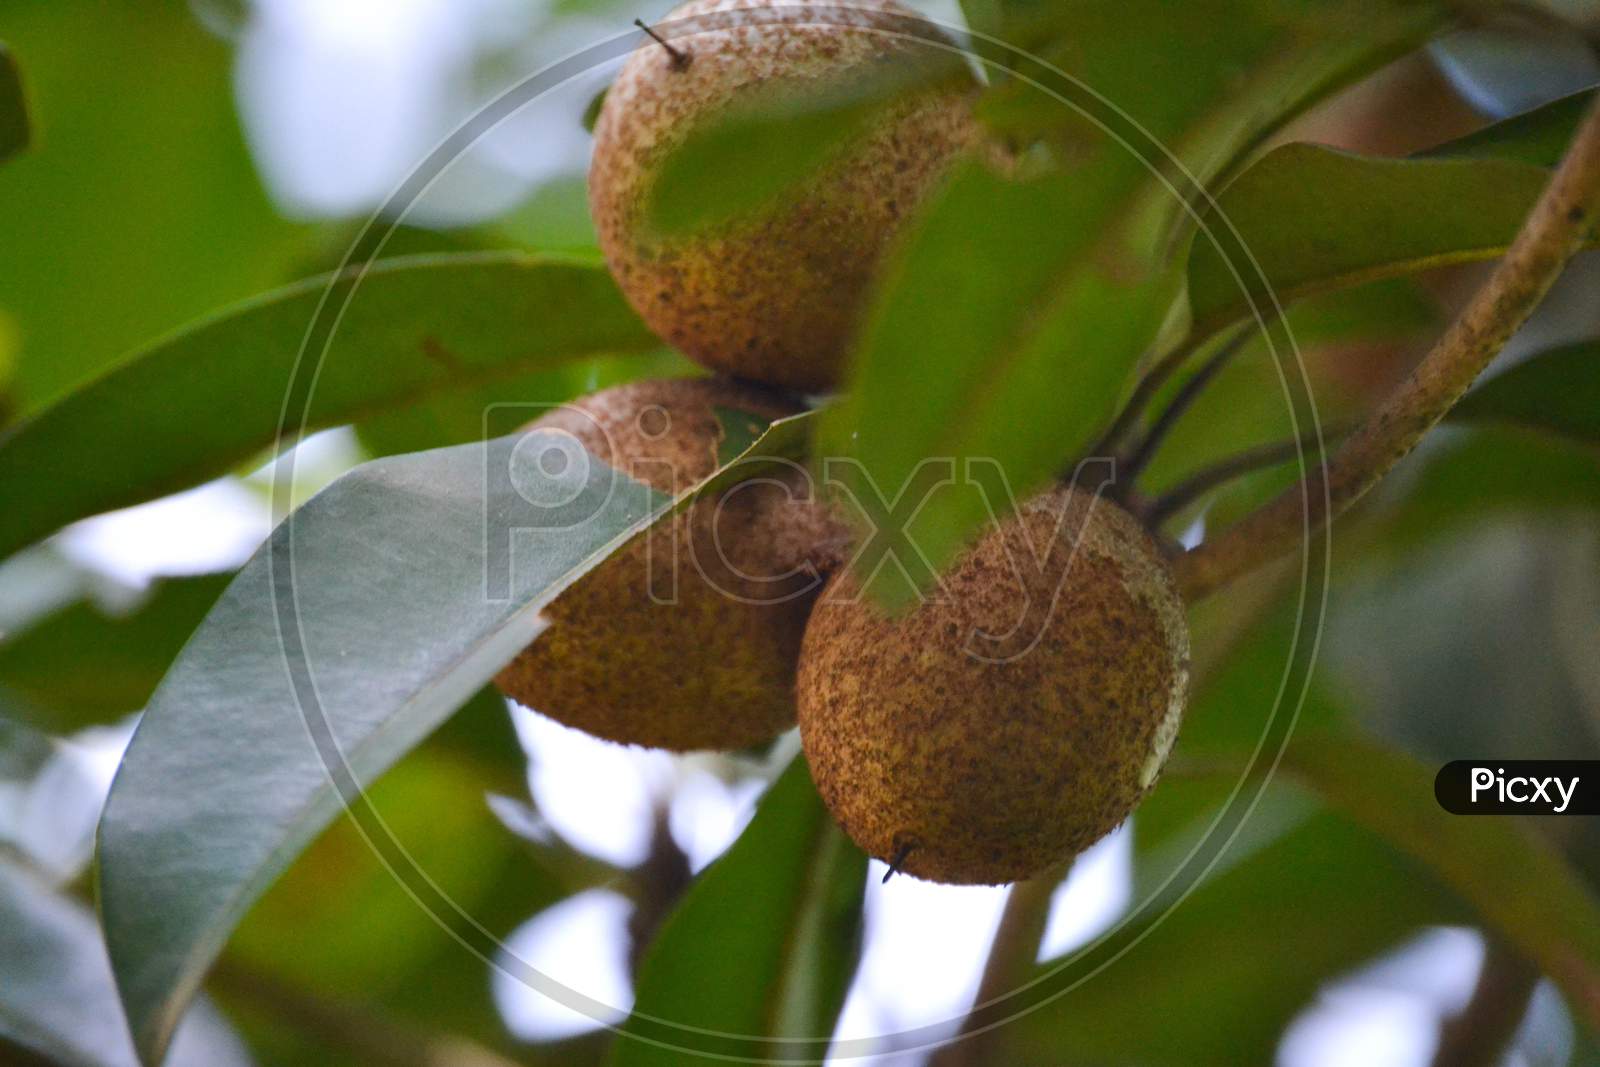 a grown chikoo fruit on a tree branch